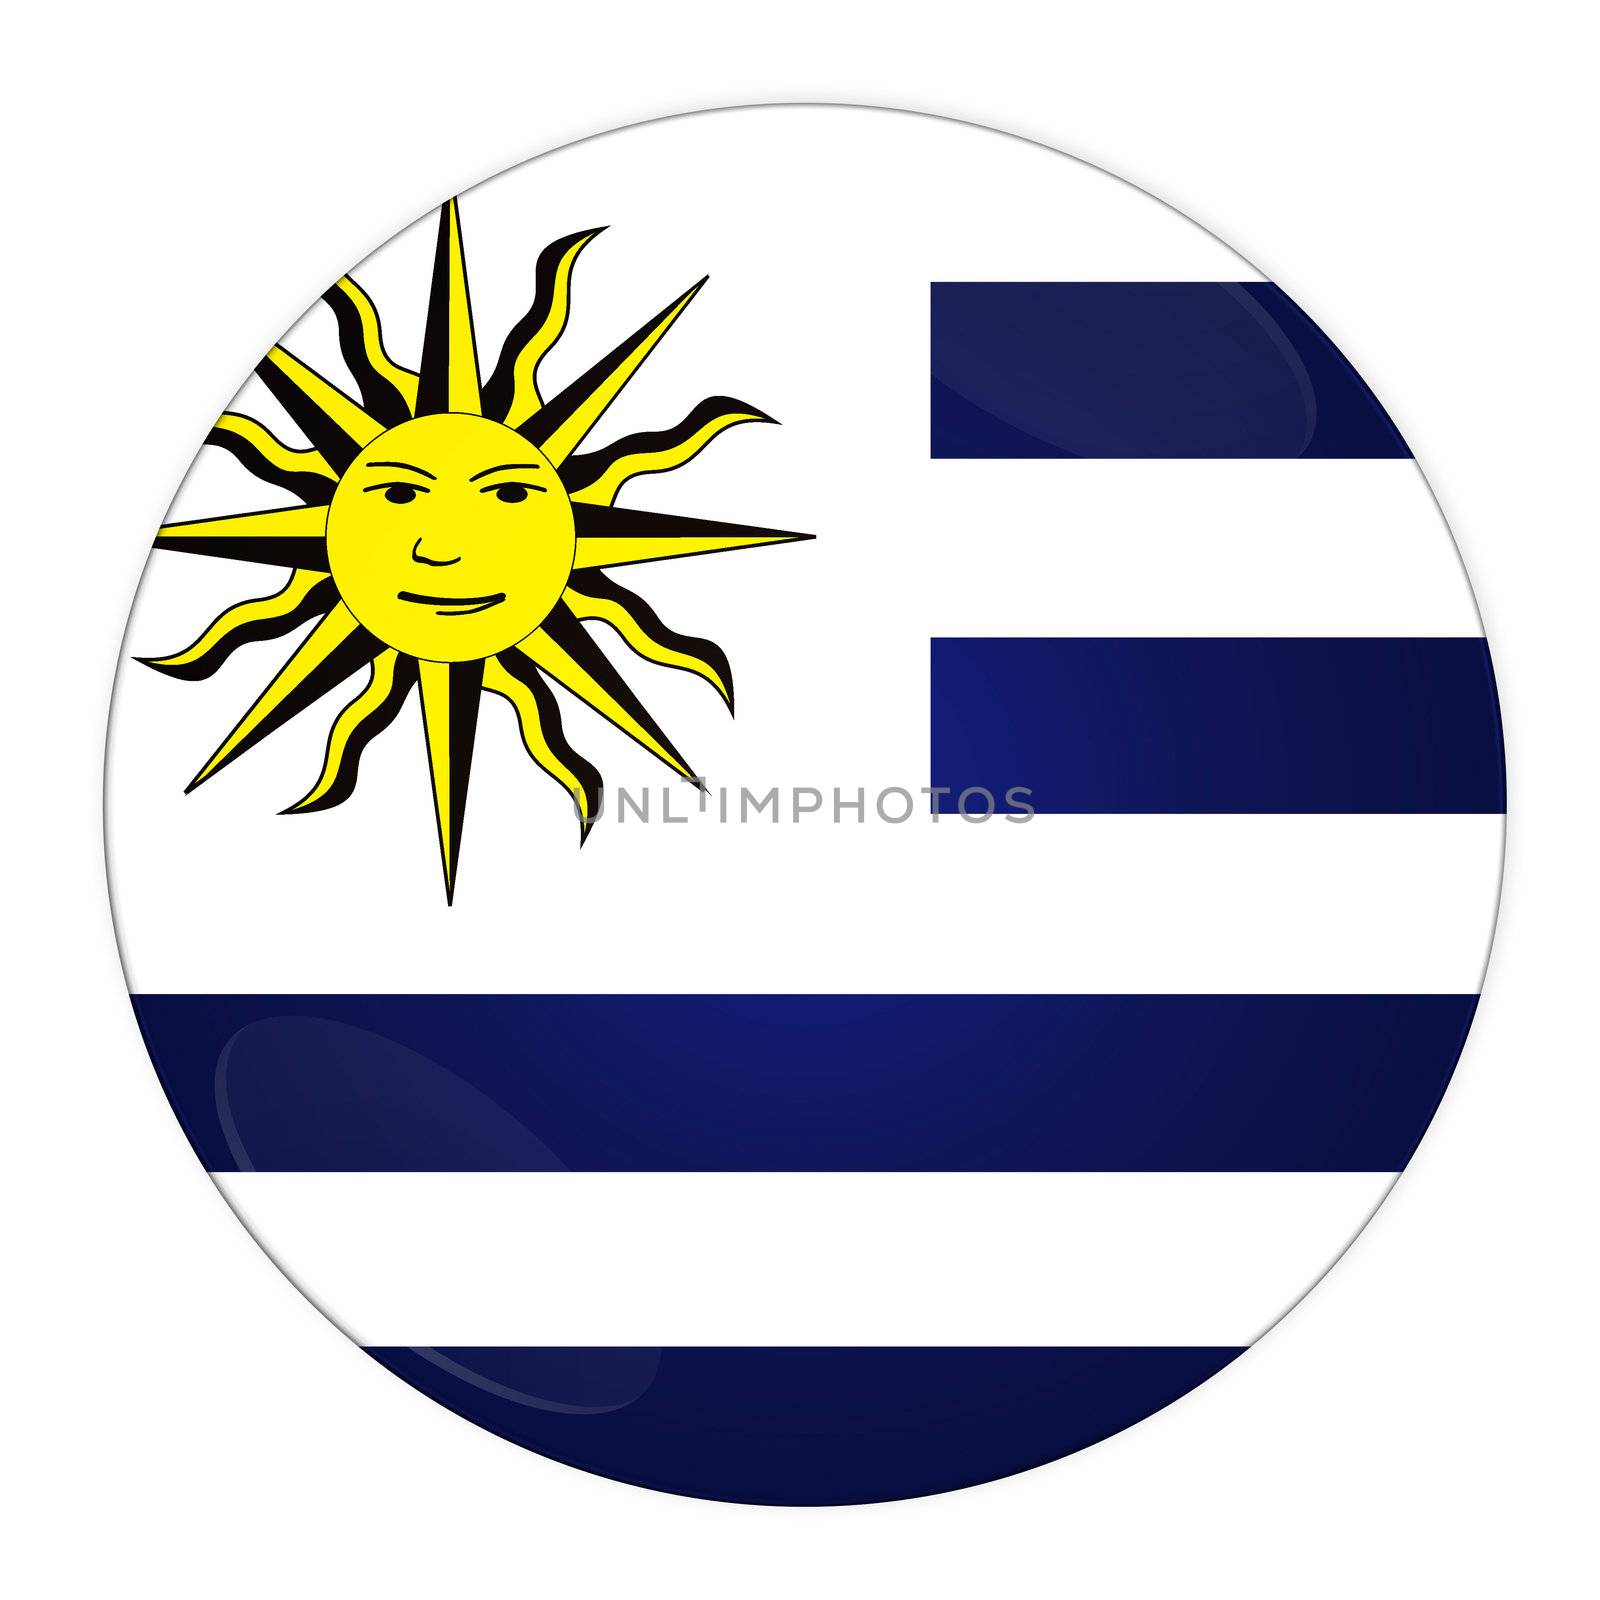 Abstract illustration: button with flag from Uruguay country